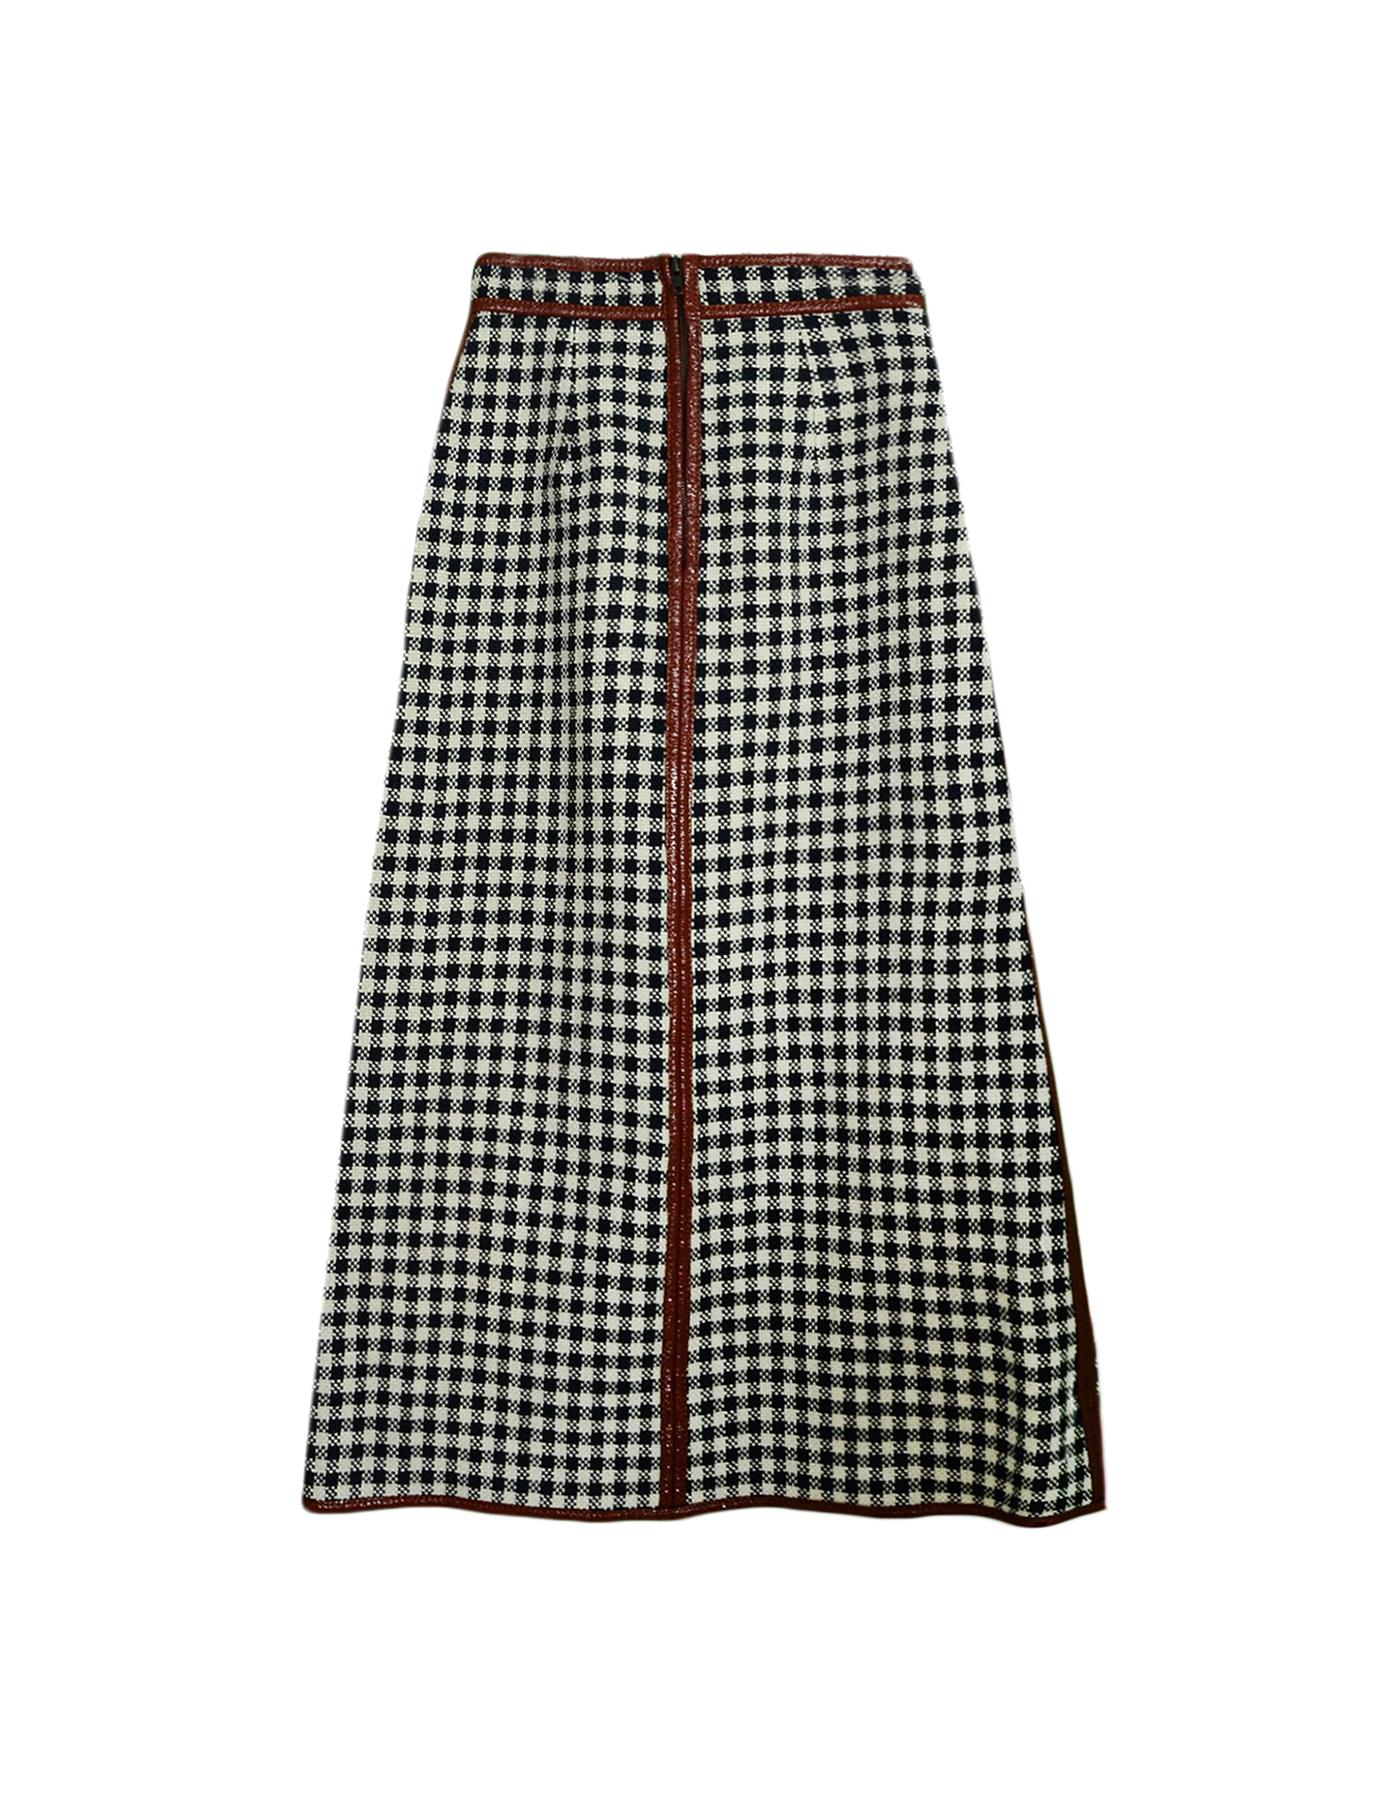 Martin Grant Navy/Cream Checked A-Line Linen-Blend Skirt with Brown Patent Trim sz FR34 NWT

Made In: France
Color: Navy, Cream, Brown
Materials: 92% Linen, 8% Cotton
Lining: Patent leather
Closure/Opening: Back zip
Overall Condition: New with tag,